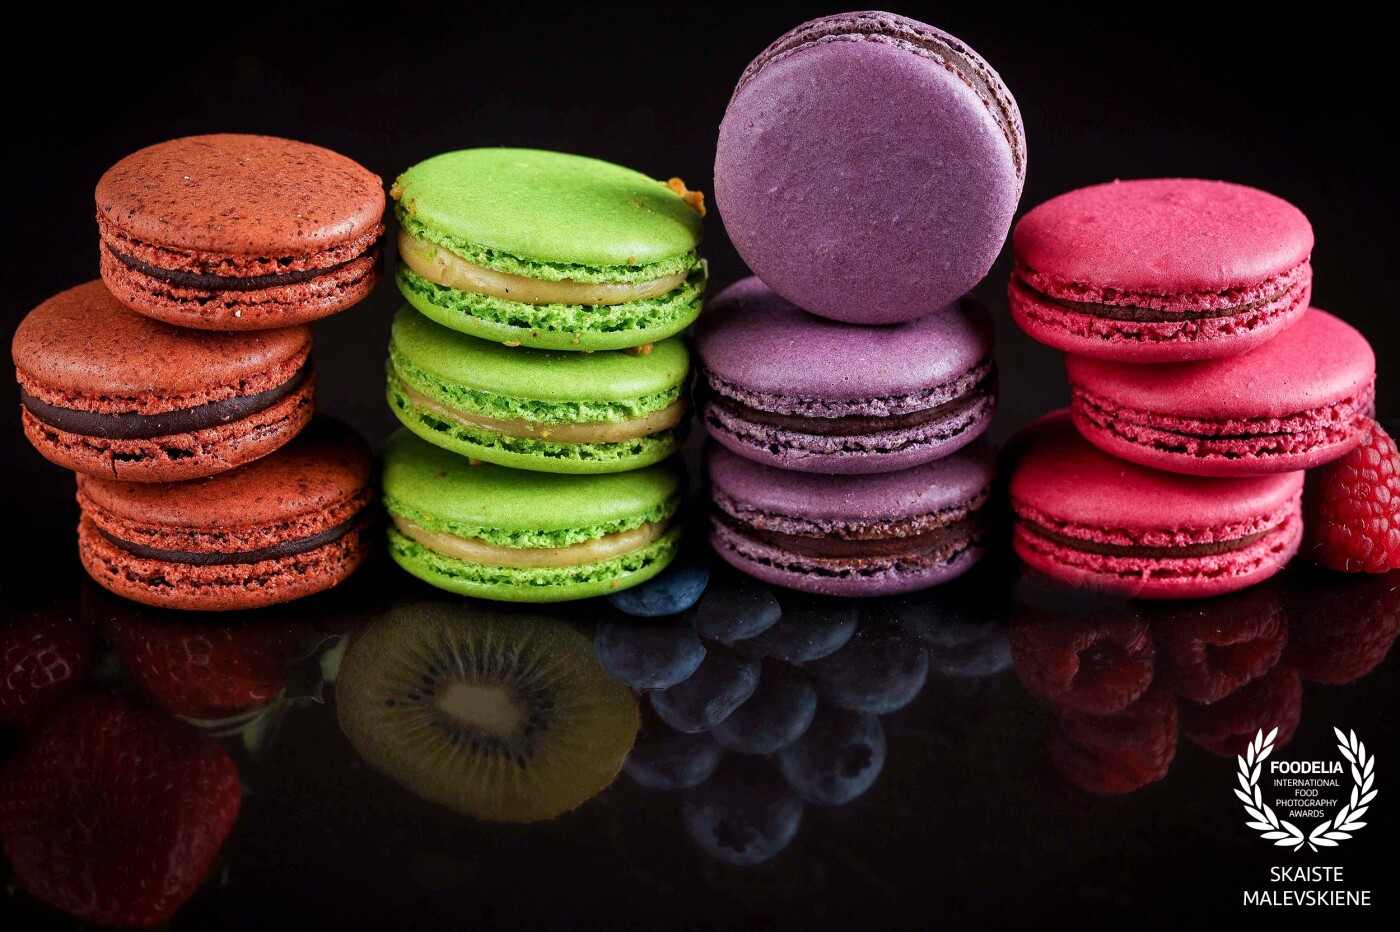 A product shot for a client. Is it the imagination or do you really see the tastes of these macaroons? Multiple shots combined to catch the idea.